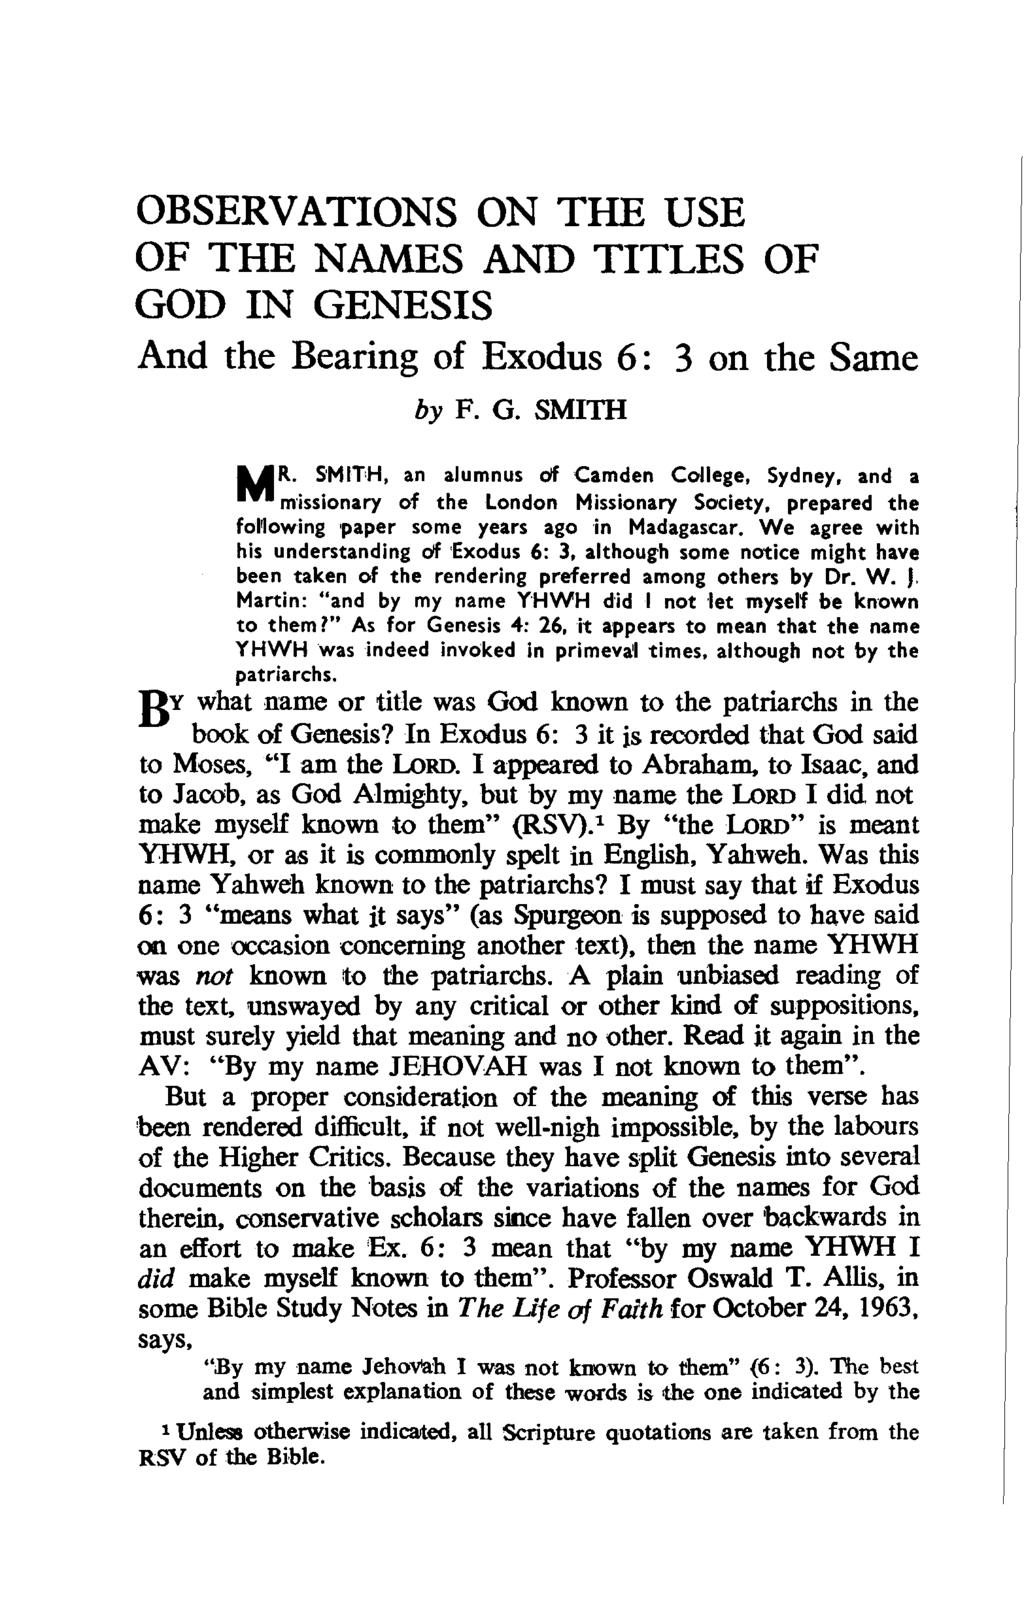 OBSERVATIONS ON THE USE OF THE NAMES AND TITLES OF GOD IN GENESIS And the Bearing of Exodus 6: 3 on the Same by F. G. SMITH MR. S'MITH. an alumnus cif Camden College. Sydney.